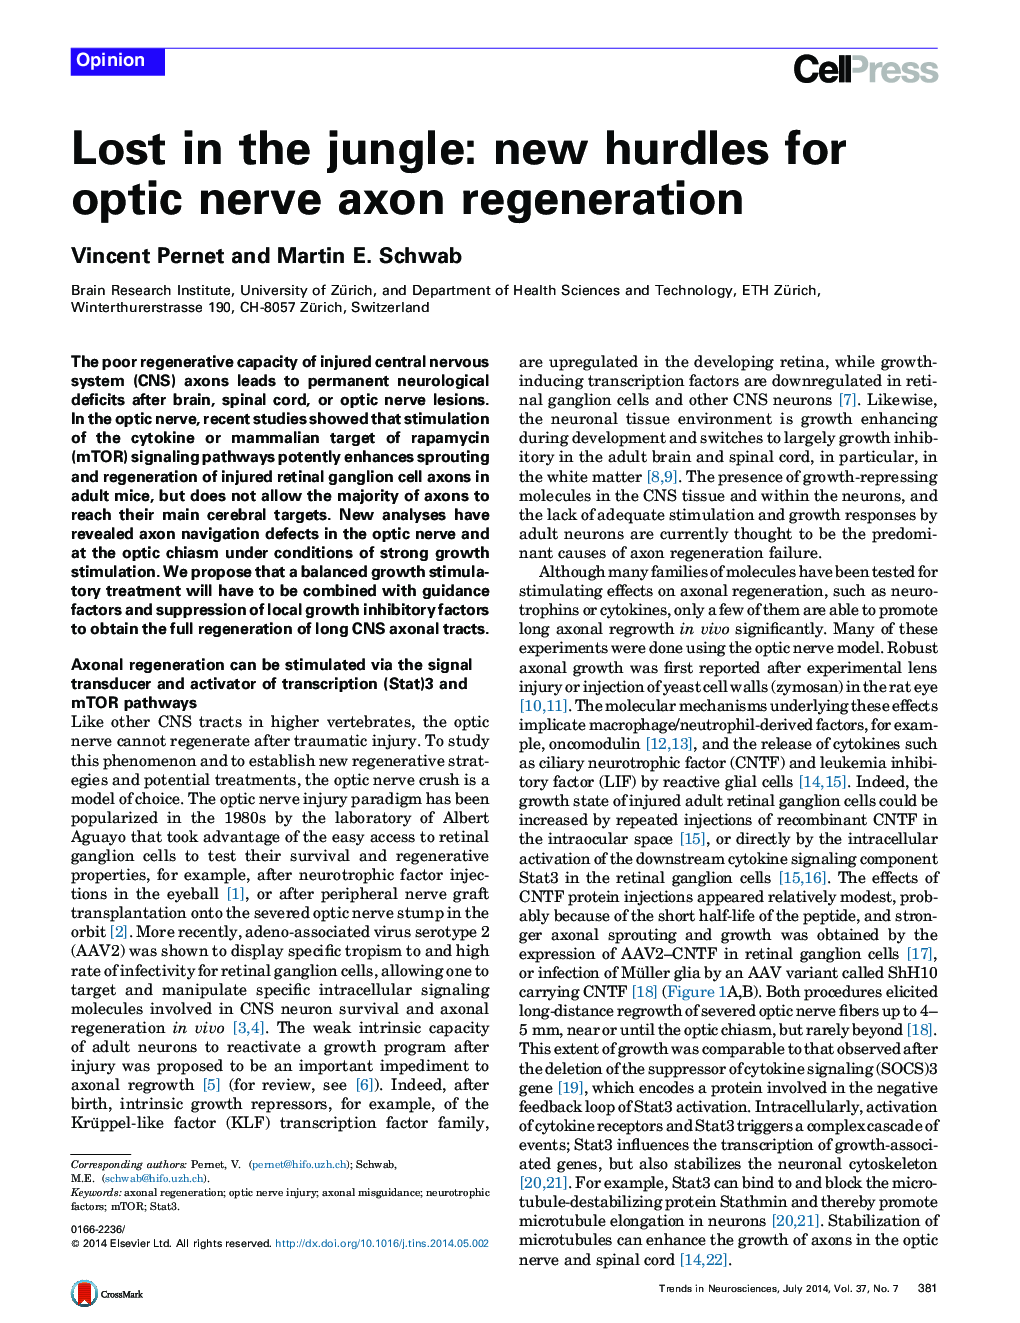 Lost in the jungle: new hurdles for optic nerve axon regeneration